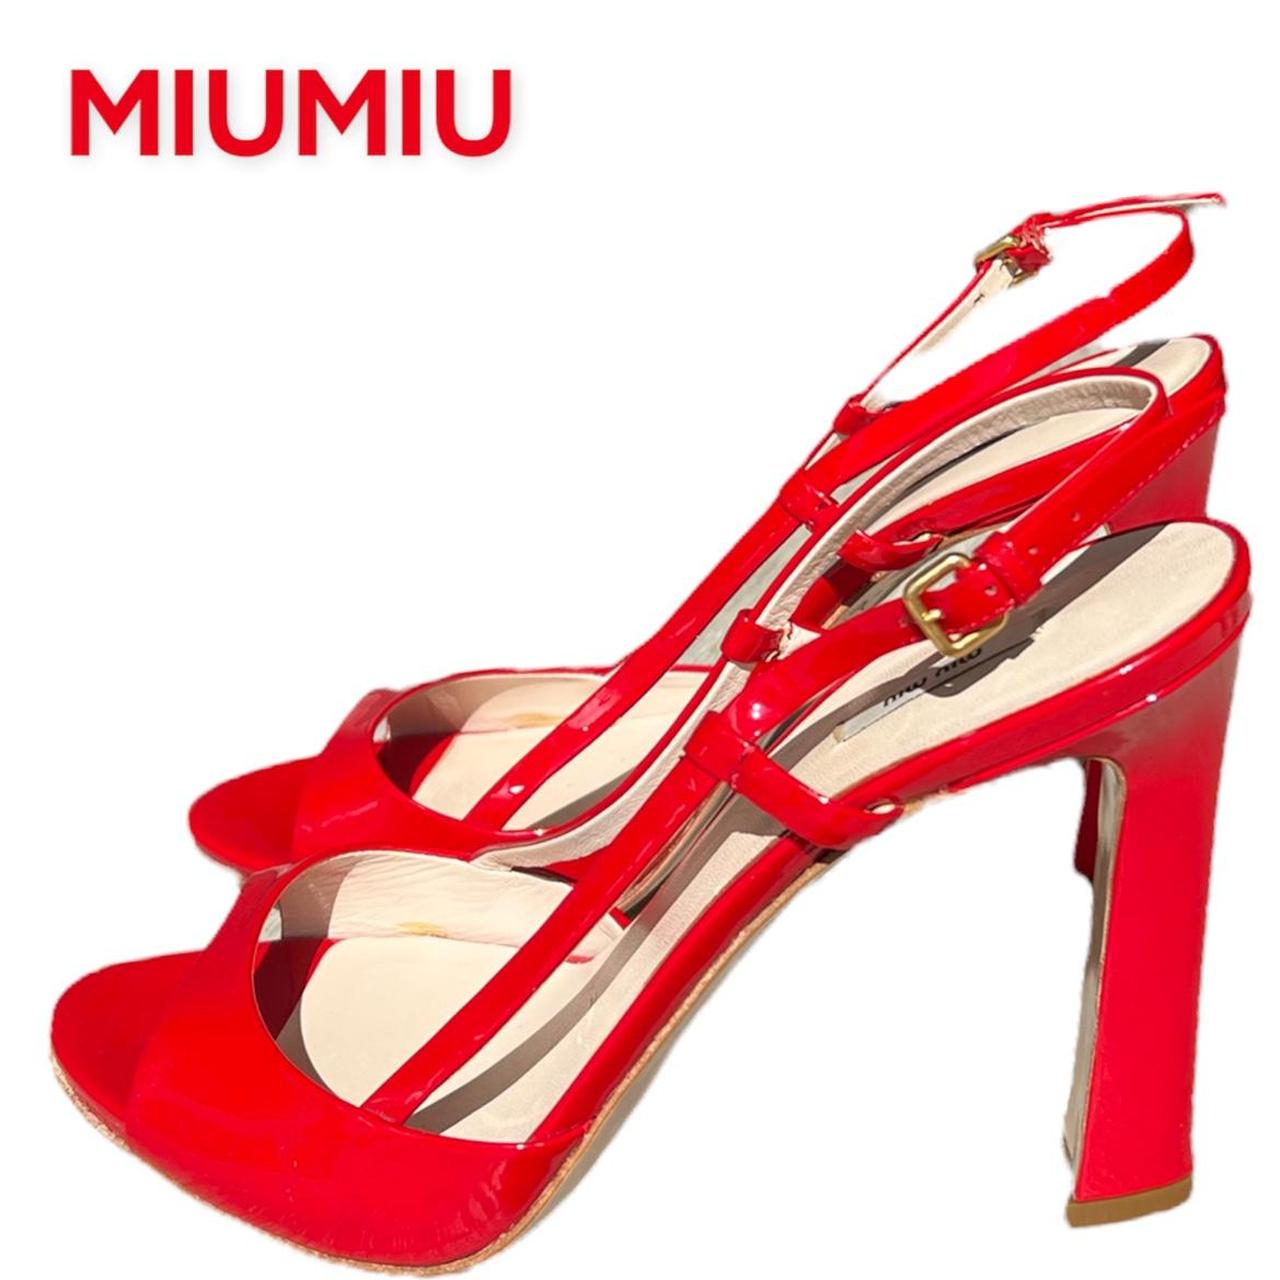 Product Image 2 - 🍒🍒
MiuMiu heels
the second photo shows